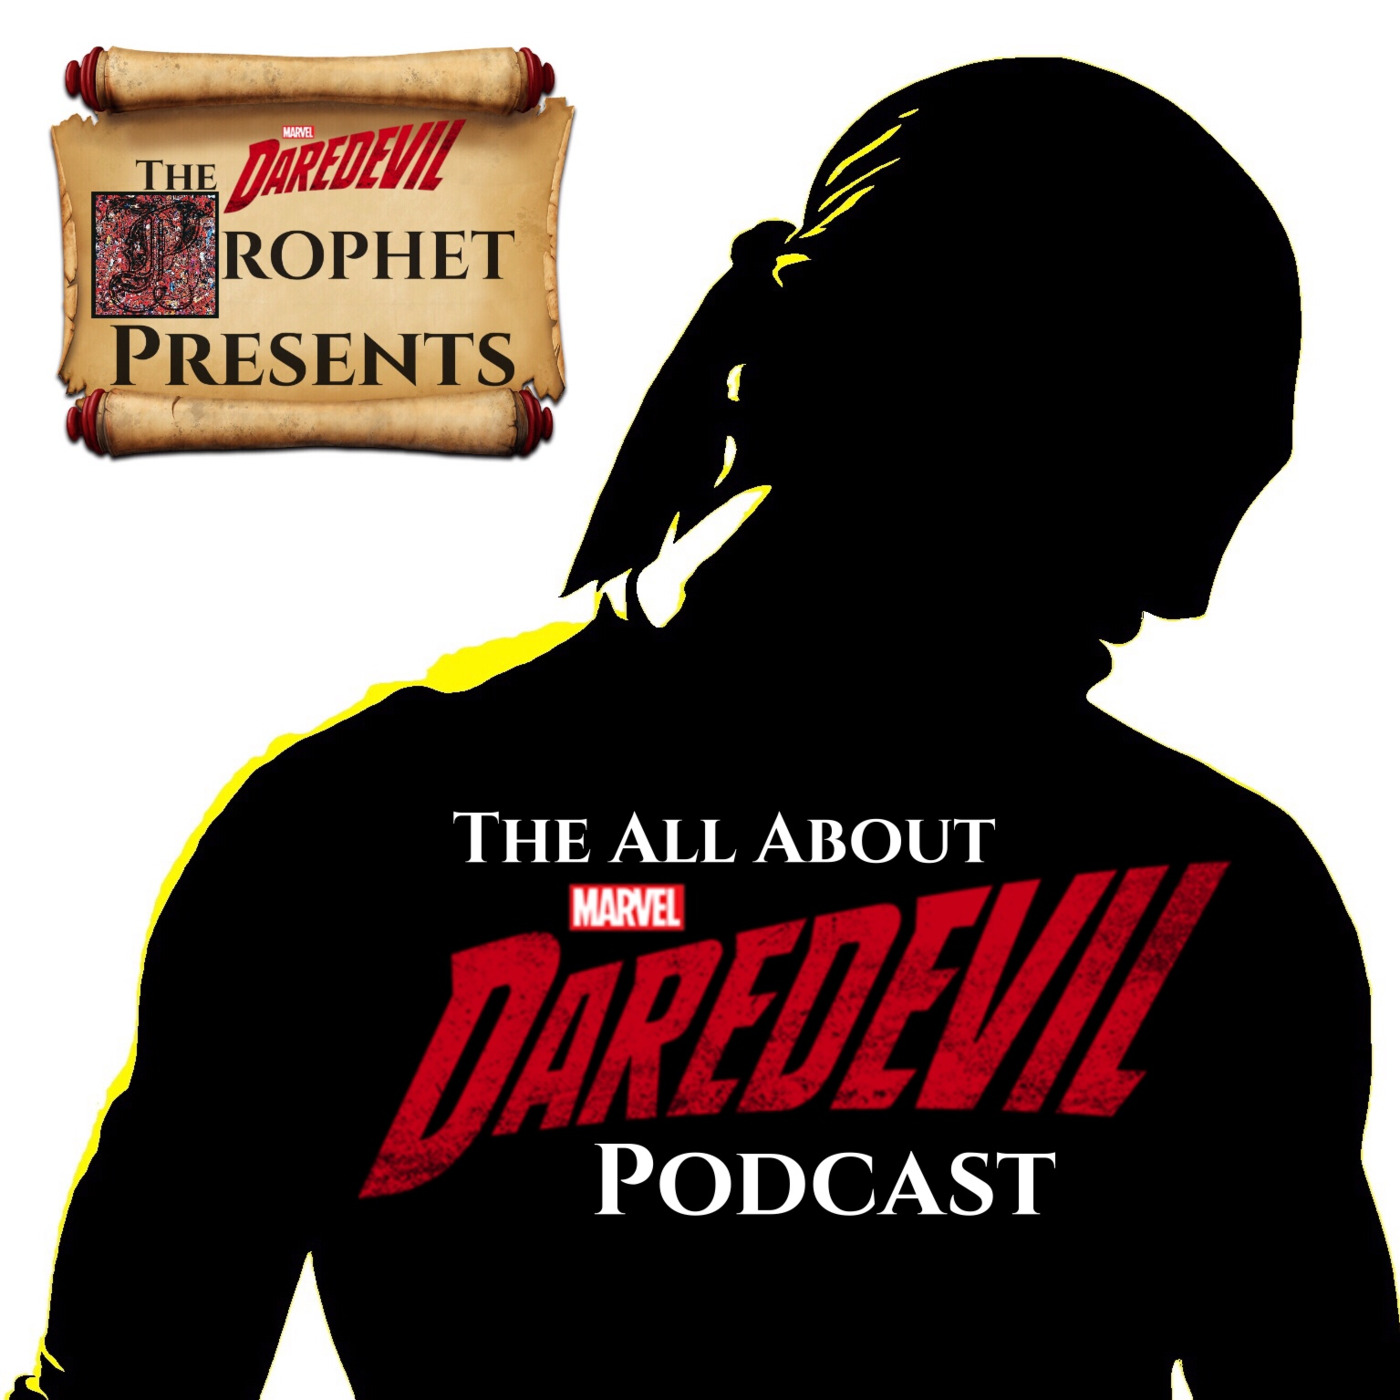 The All About Daredevil Podcast